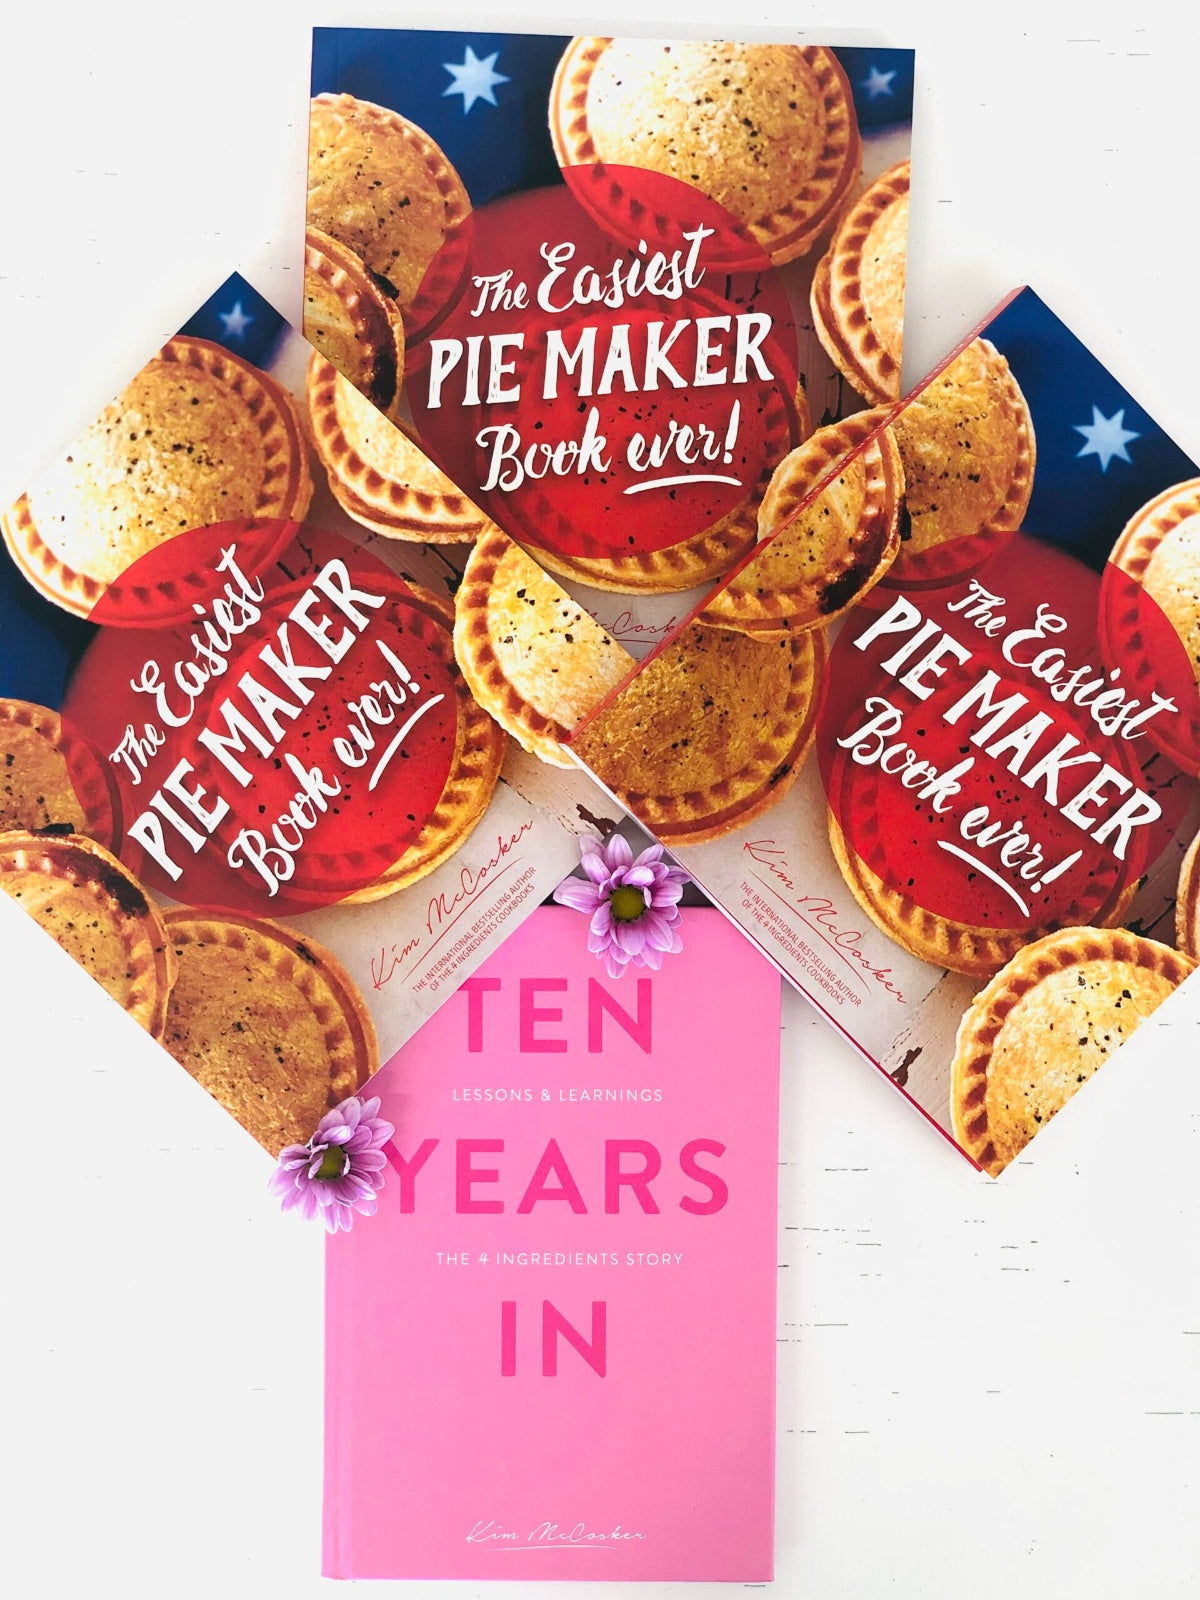 The Easiest Pie Maker Book ever (3 copies) + a FREE copy of Ten Years In